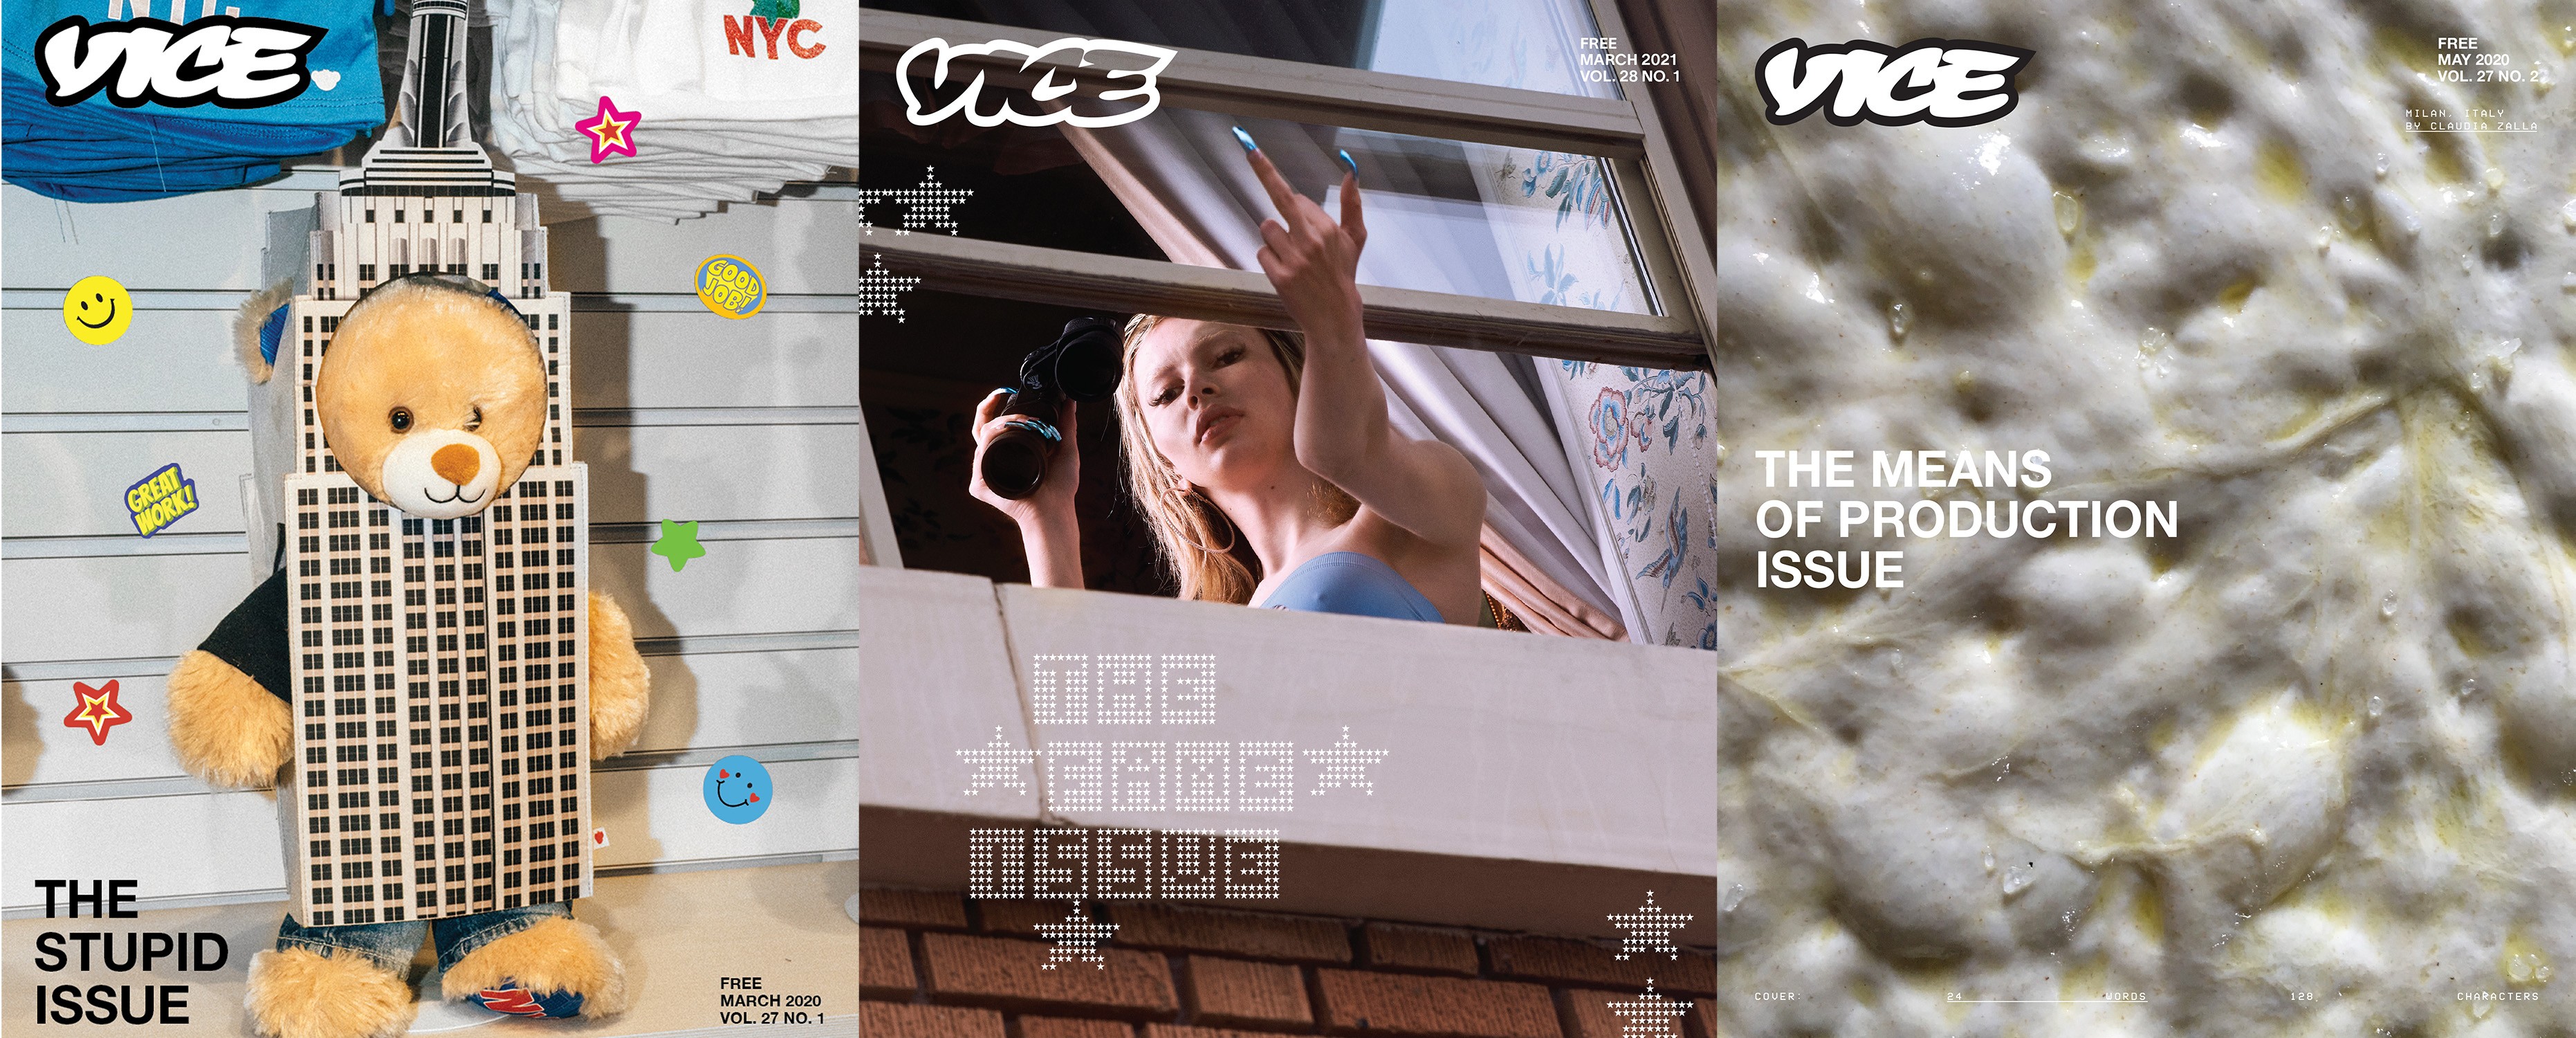 How To Subscribe To Vice Magazine And Get The Fame Issue